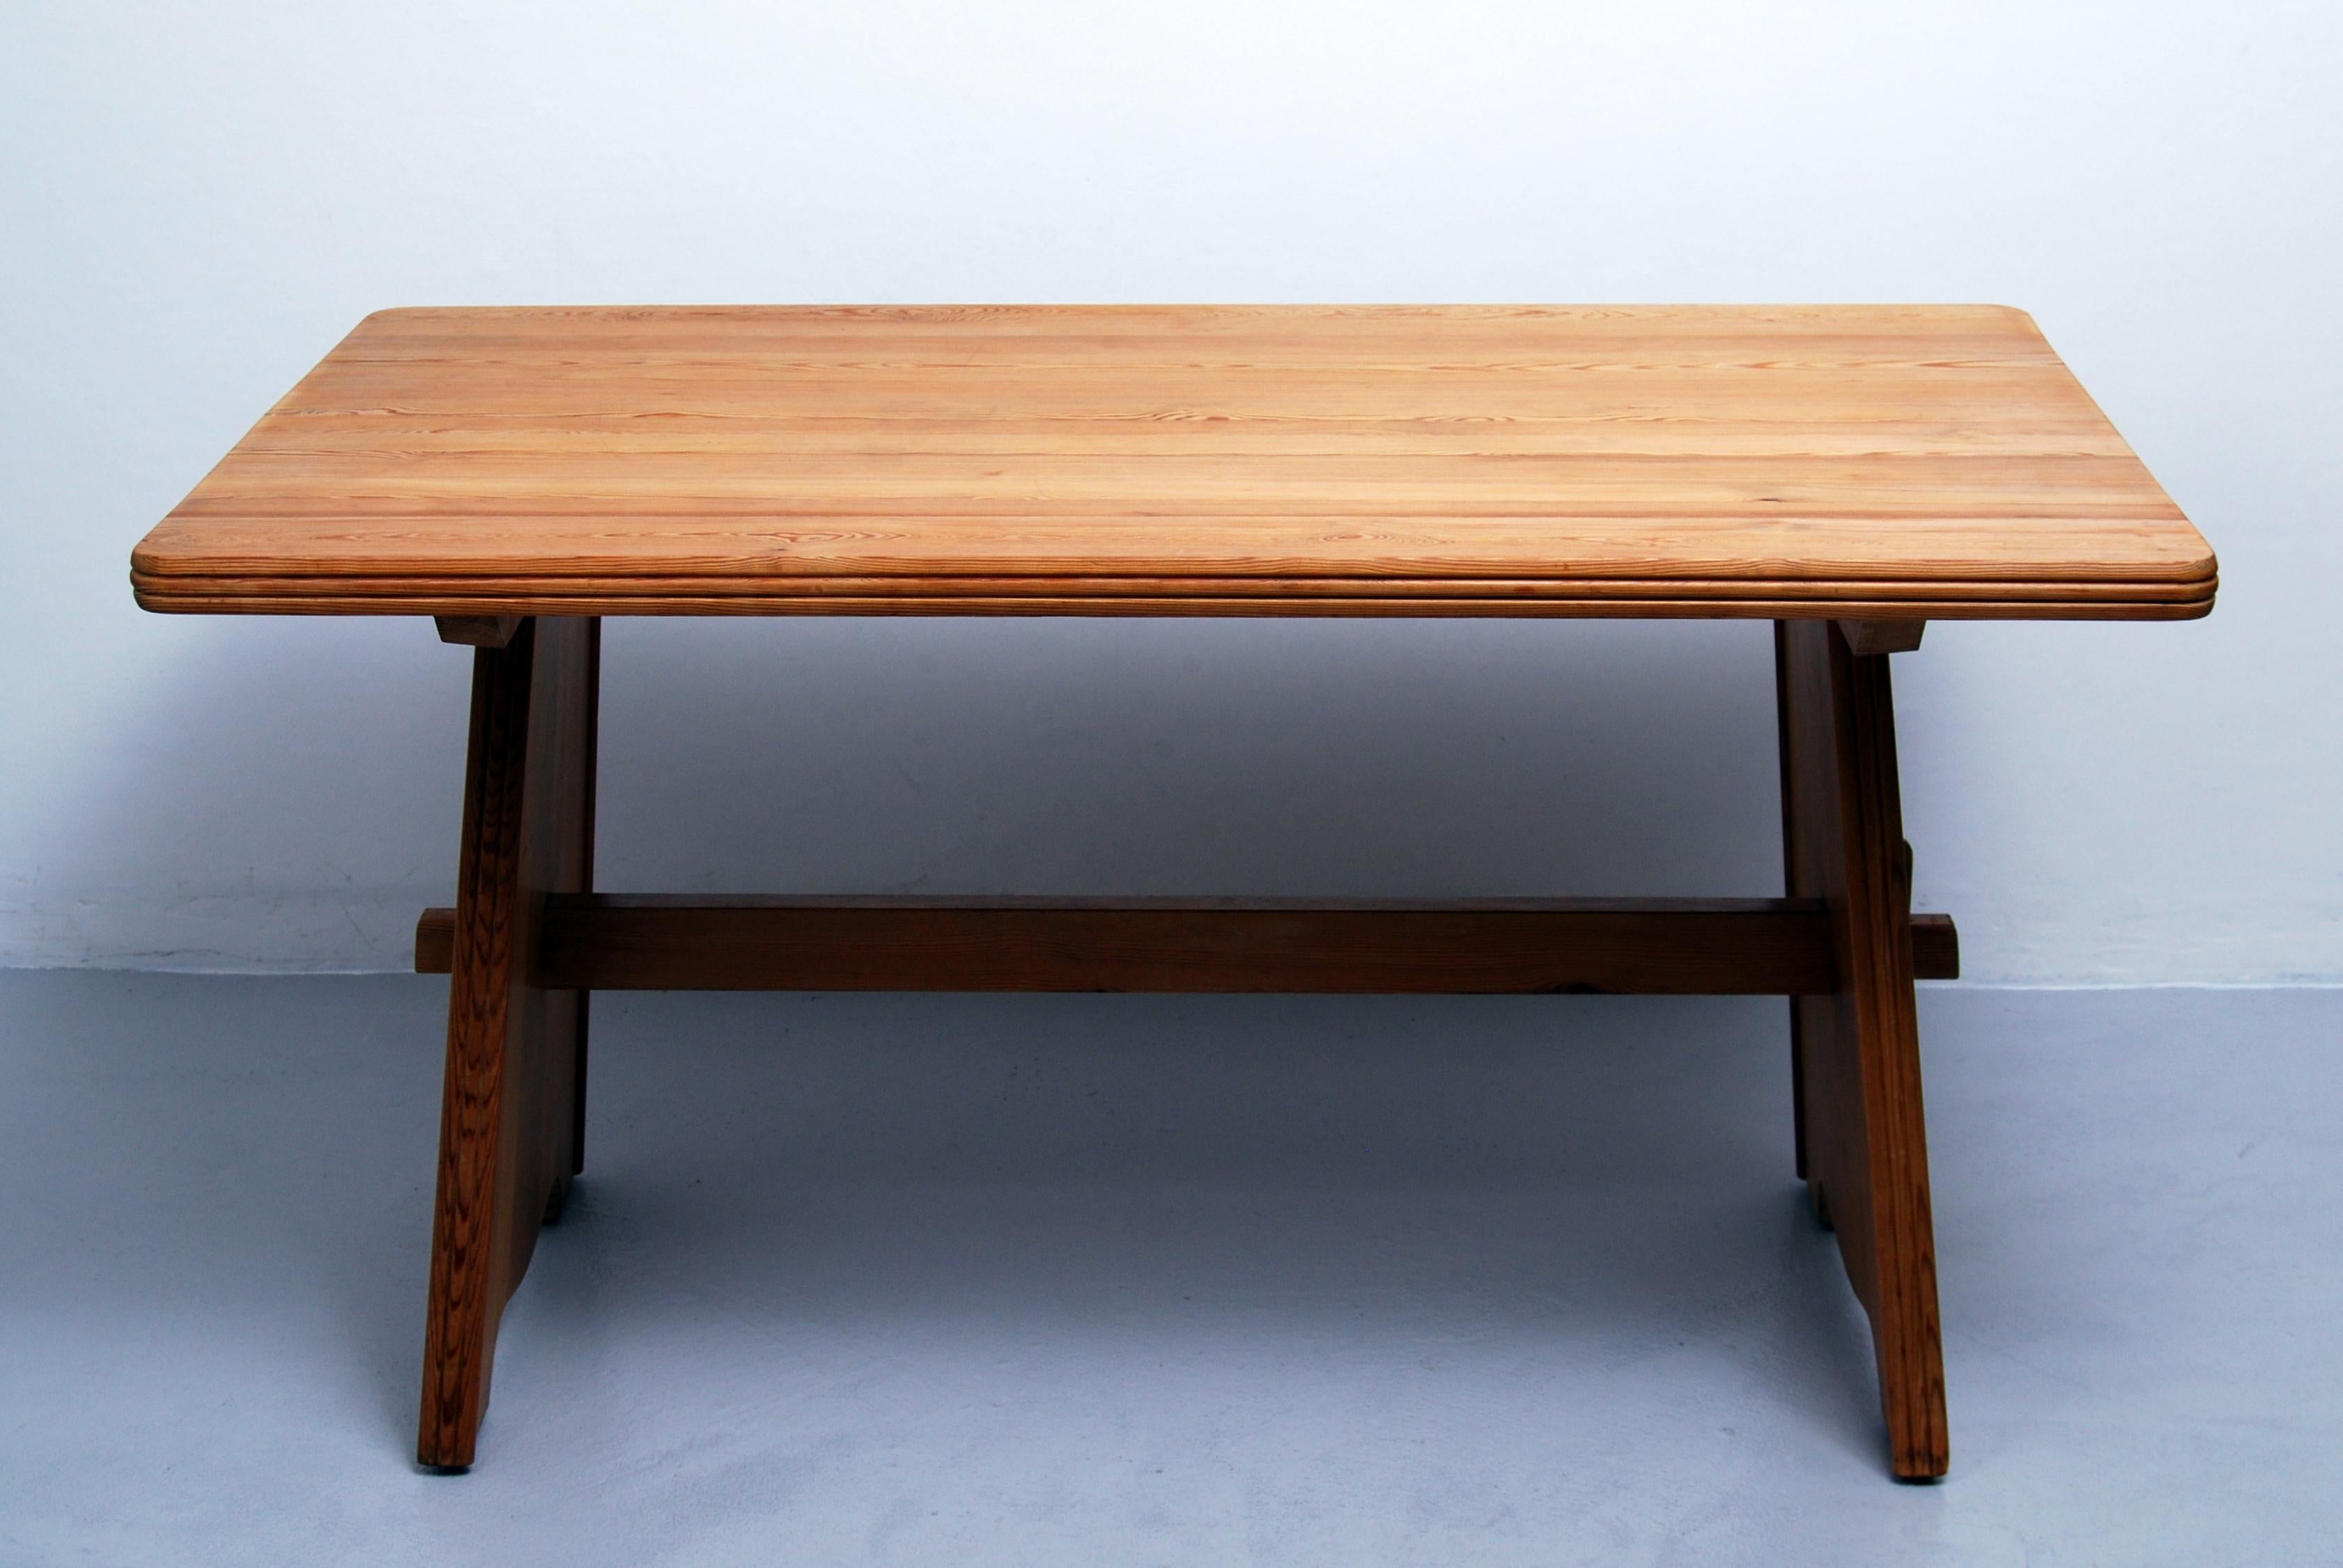 Swedish dining table in solid pine with beautiful grain designed by Göran Malmvall for Svensk Fur in the 1950s. Same style as Axel Einar Hjorths pine wood furniture series. Stable construction and the table disassembles for shipping, only five